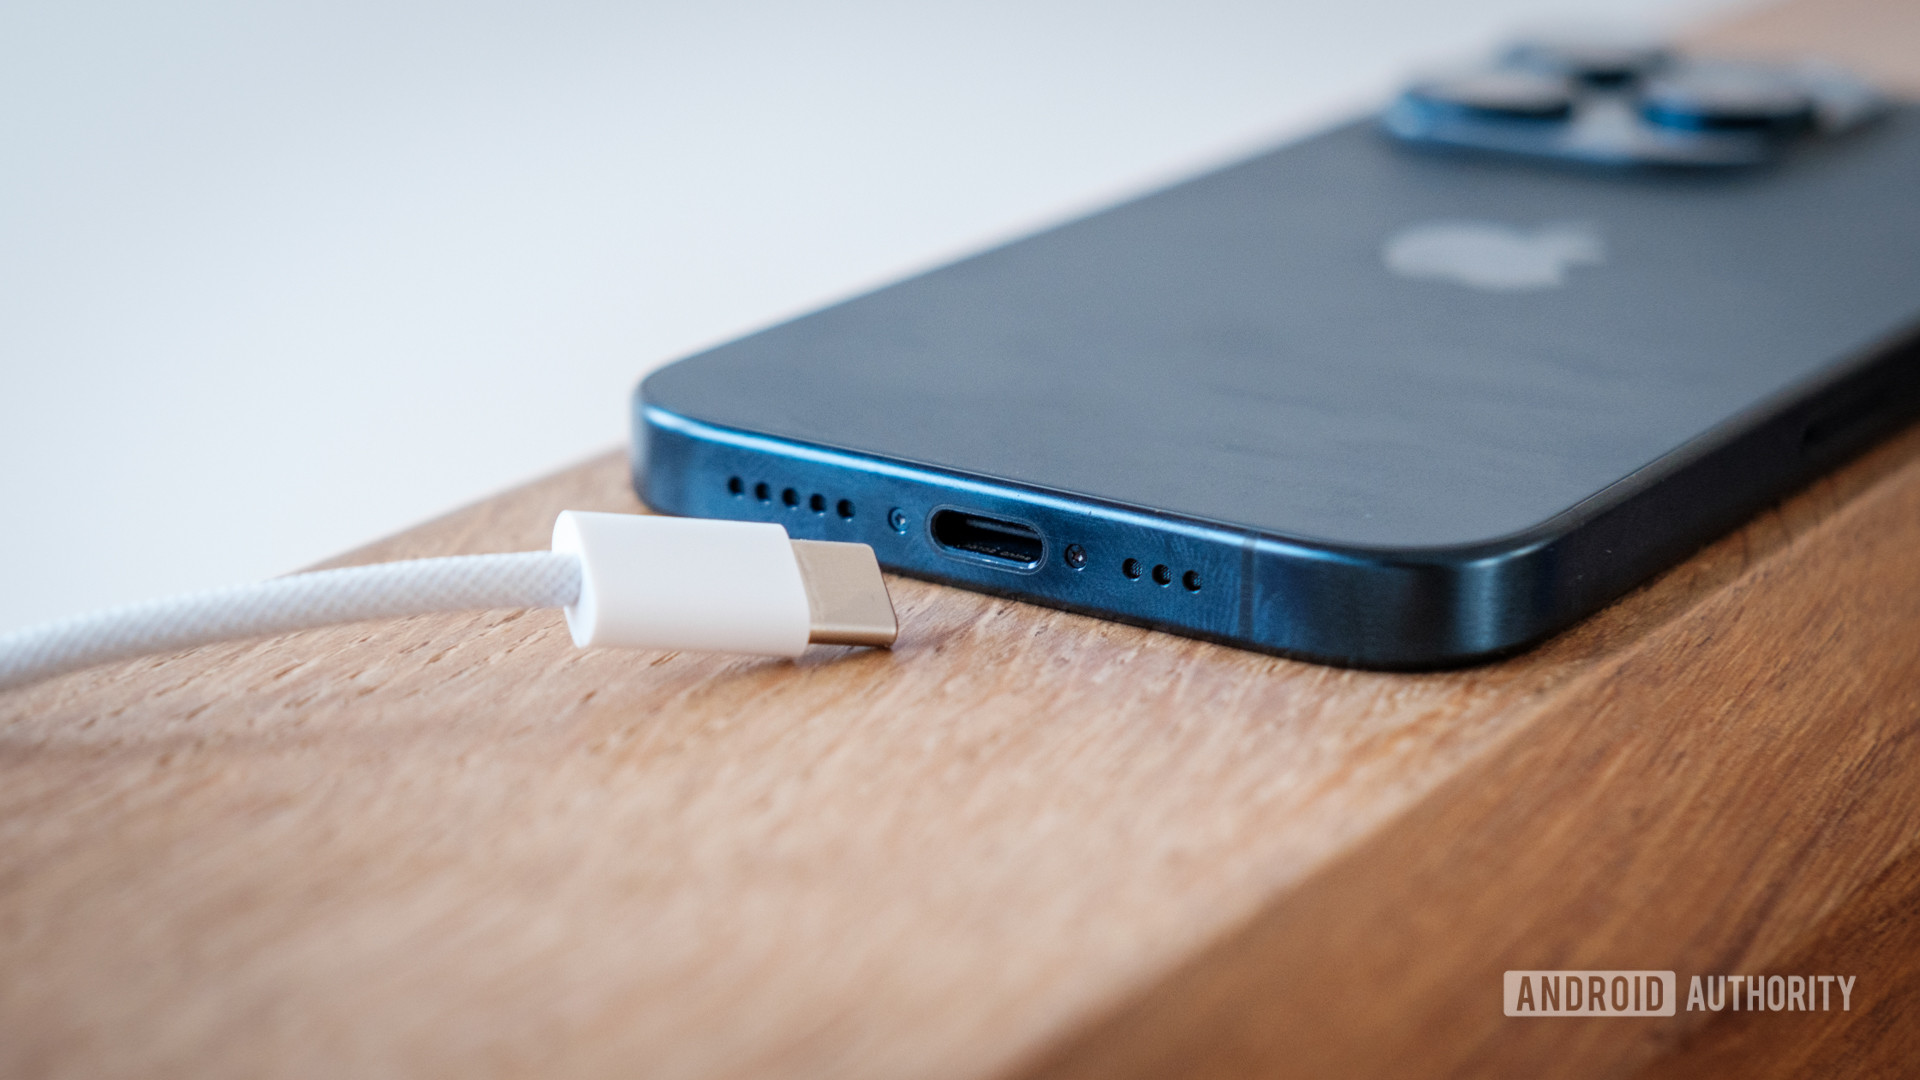 As an Android user, I can't wait for USB-C on the iPhone 15